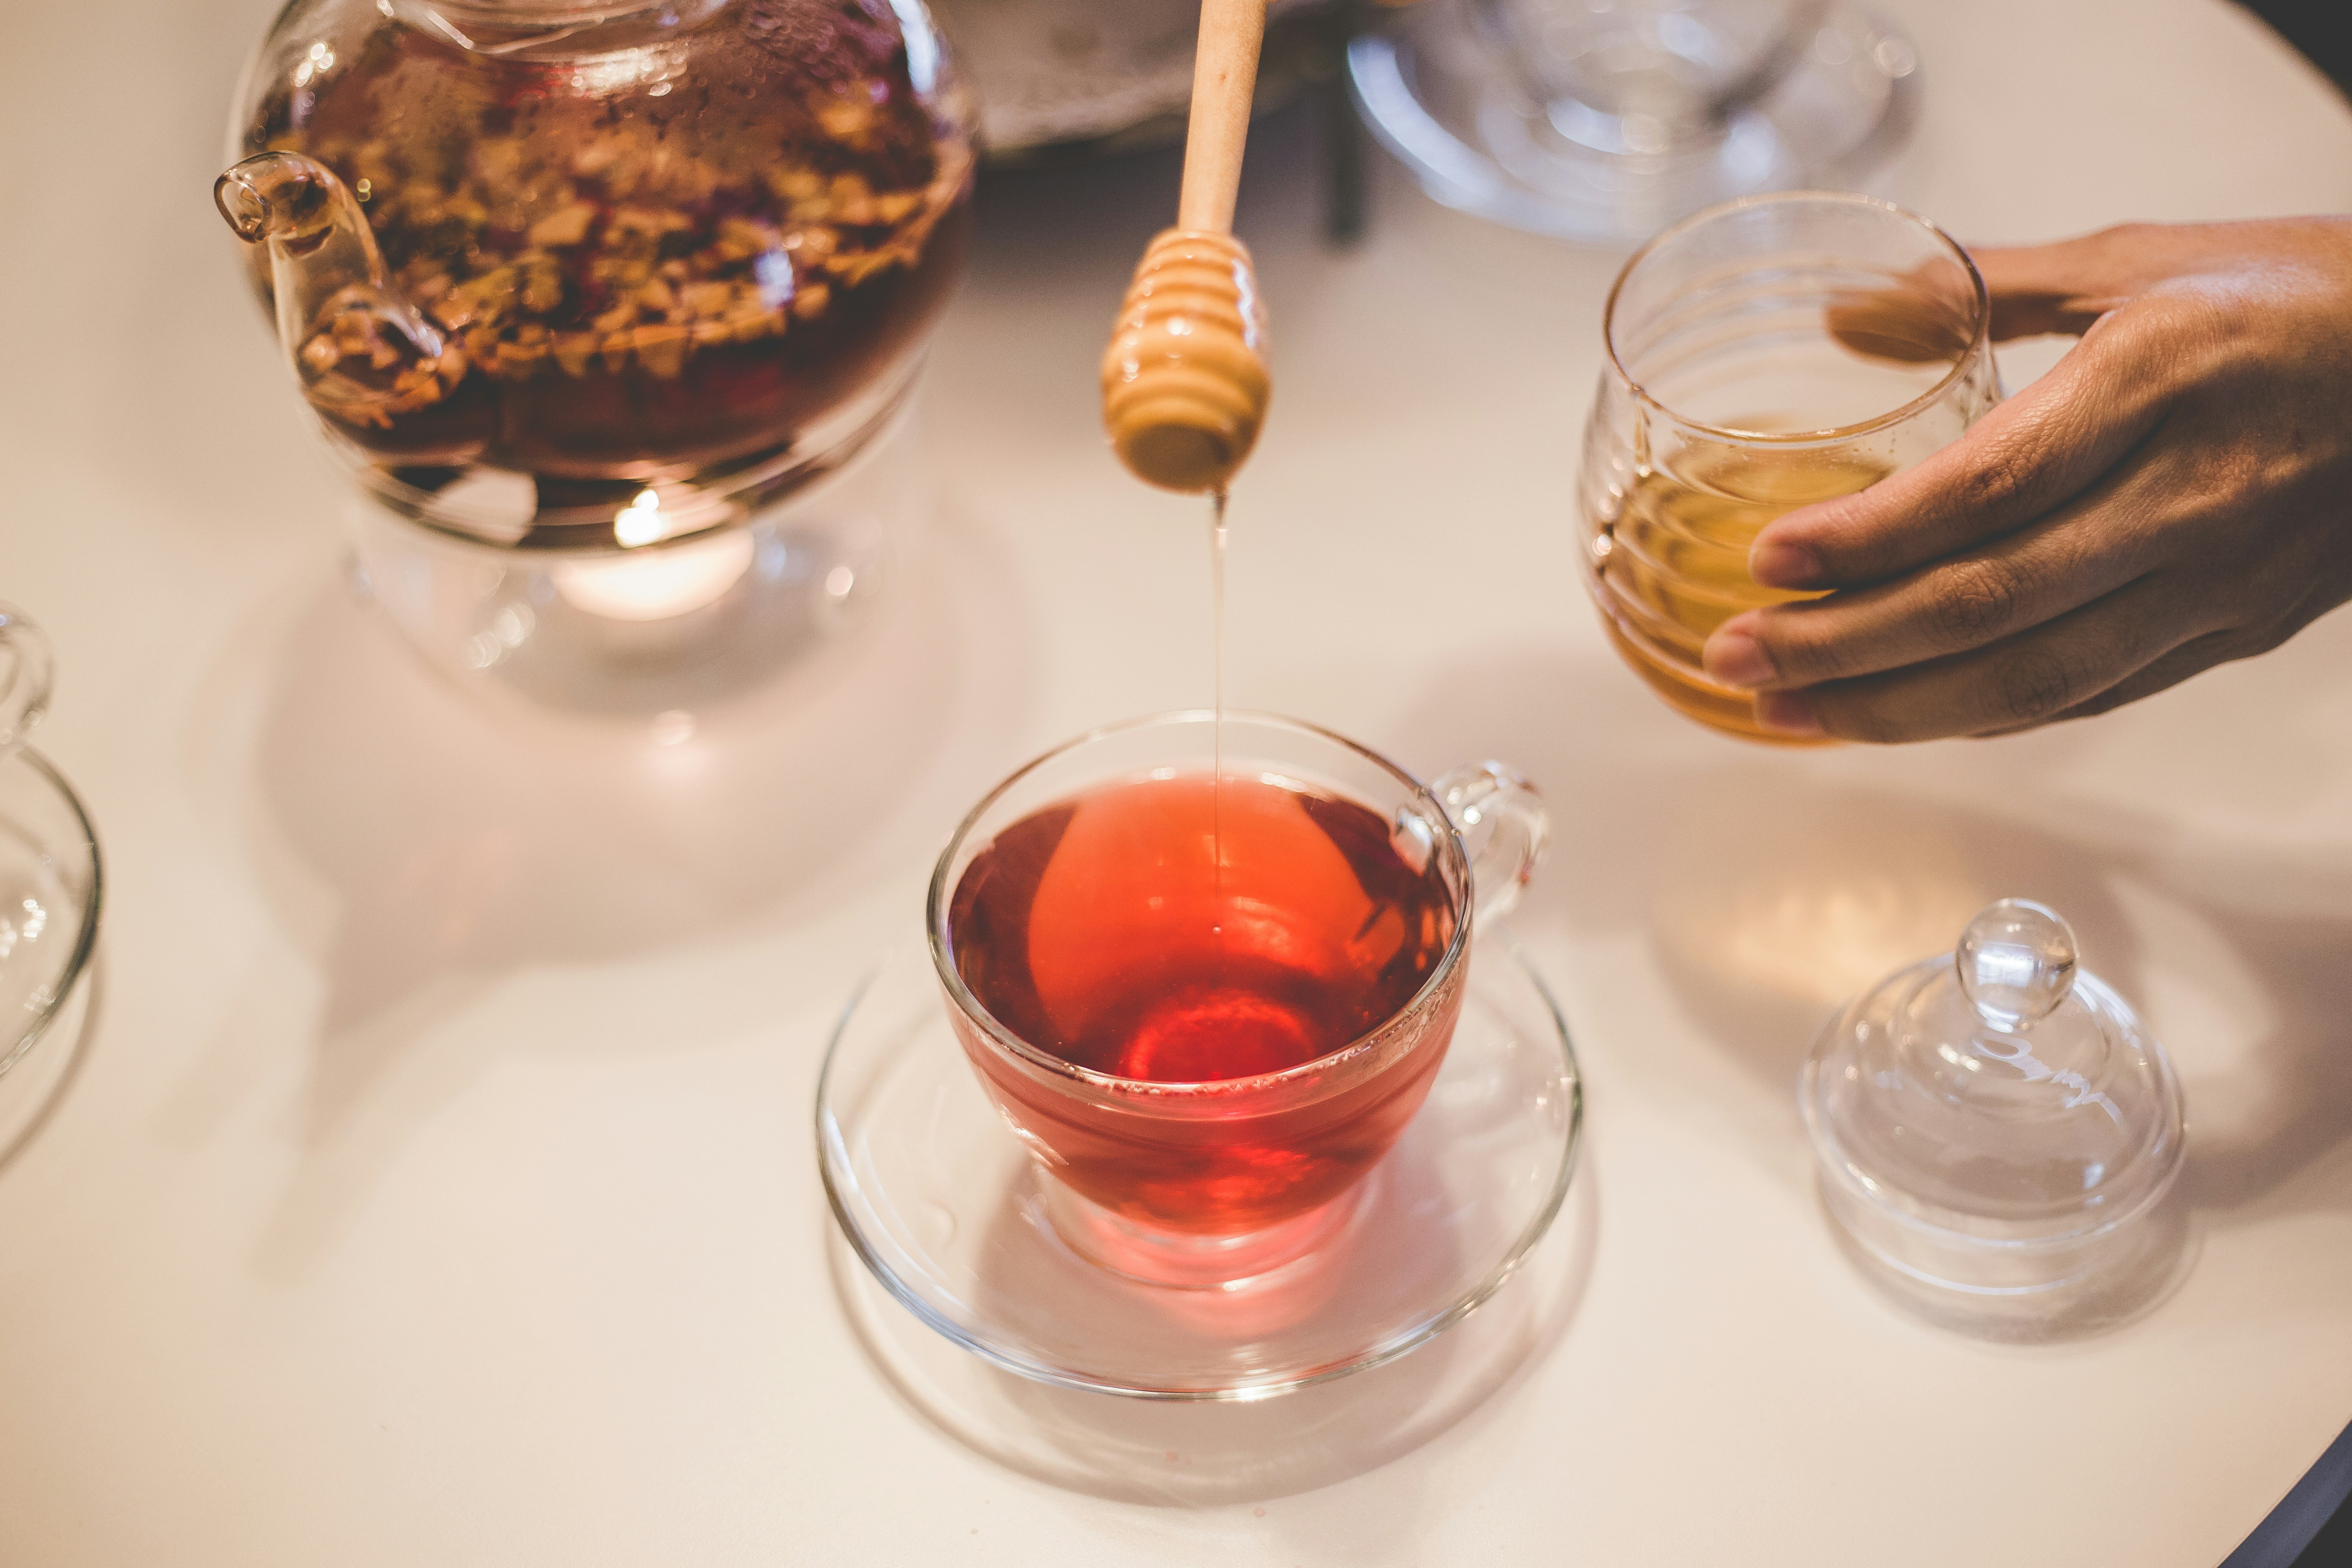 Person drizzling honey into tea cup with herbal tea, glass teapot on warmer in background